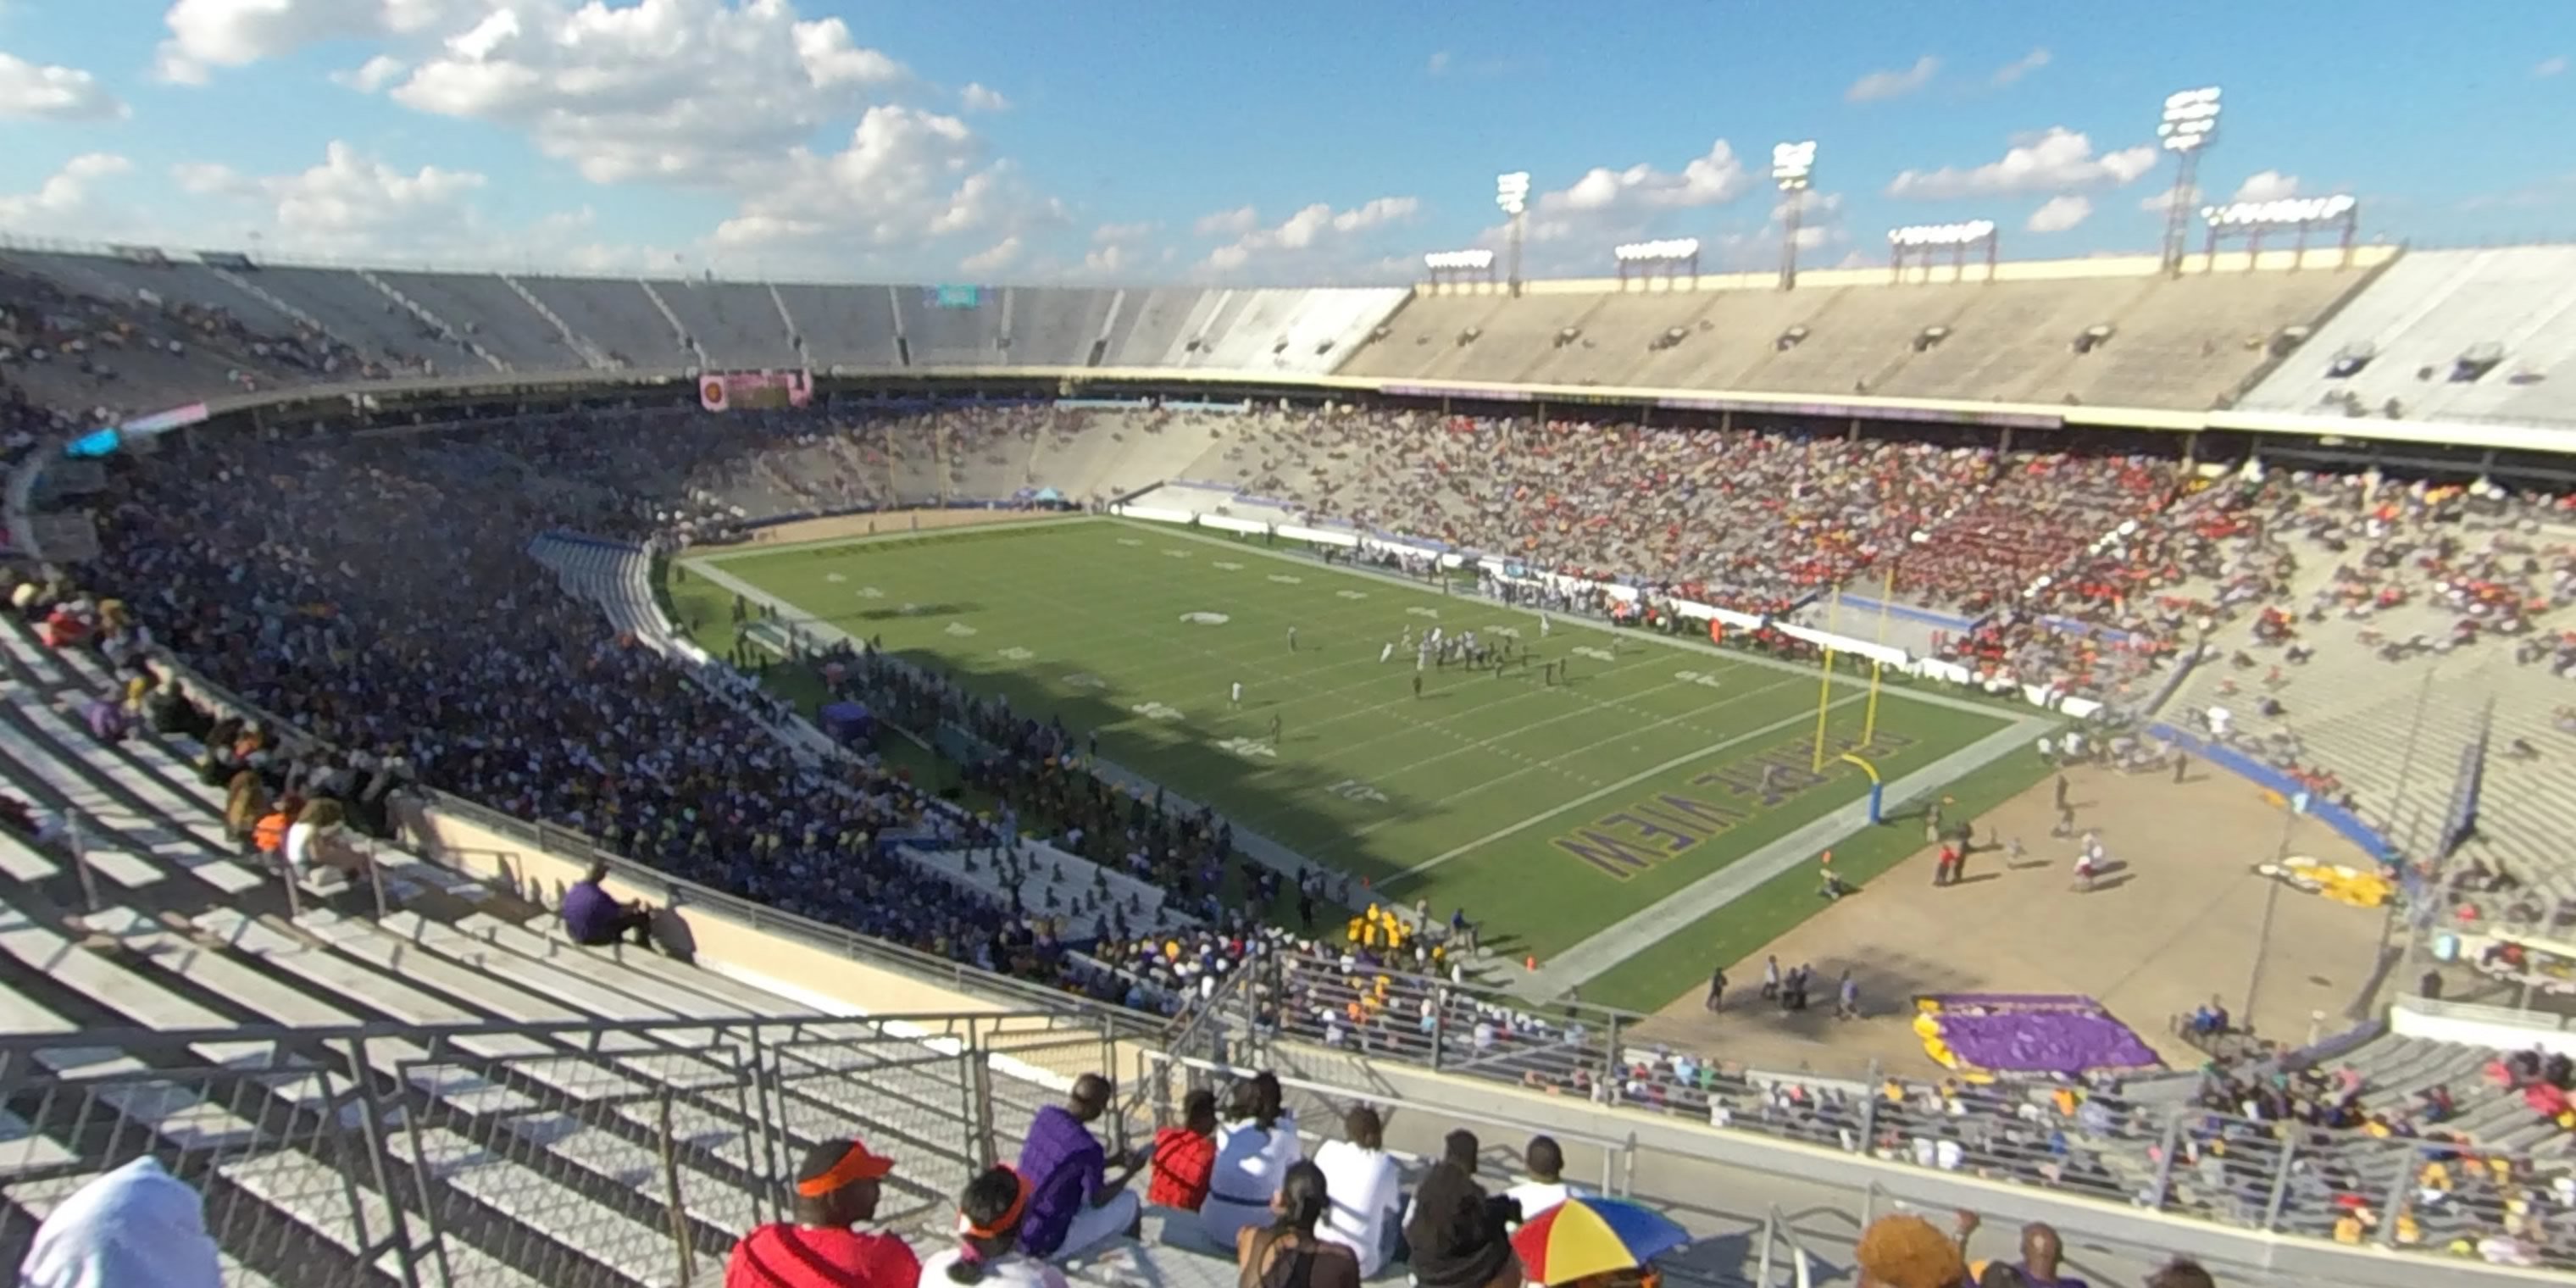 section 143 panoramic seat view  - cotton bowl